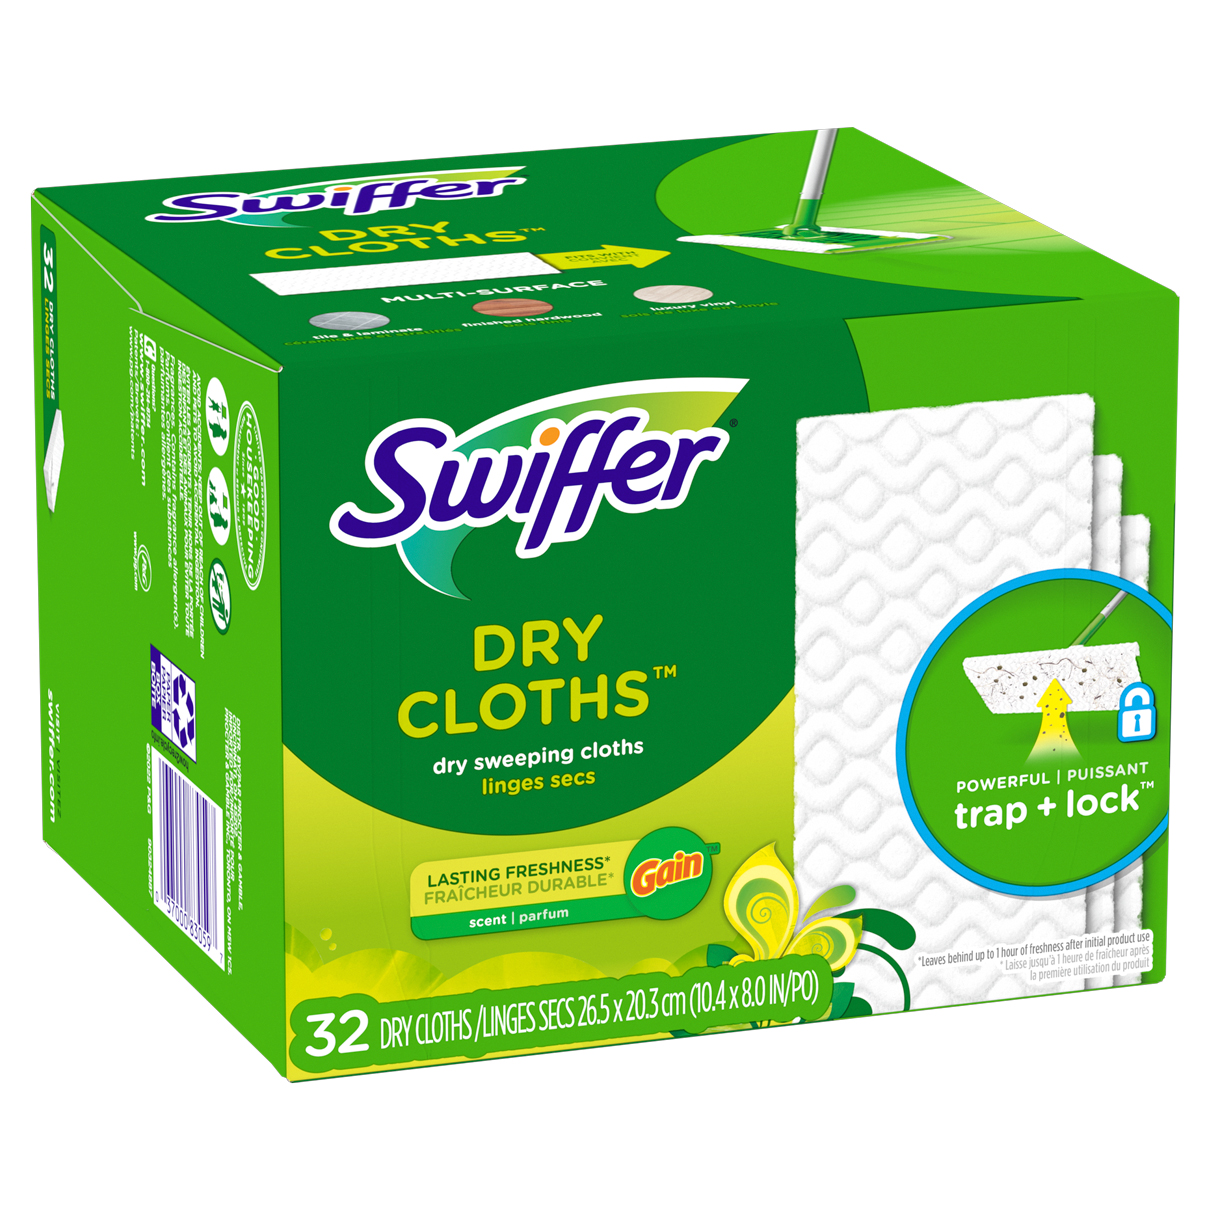 Swiffer Sweeper Heavy-Duty Dry Sweeping Cloths (32-Count, 2-Pack